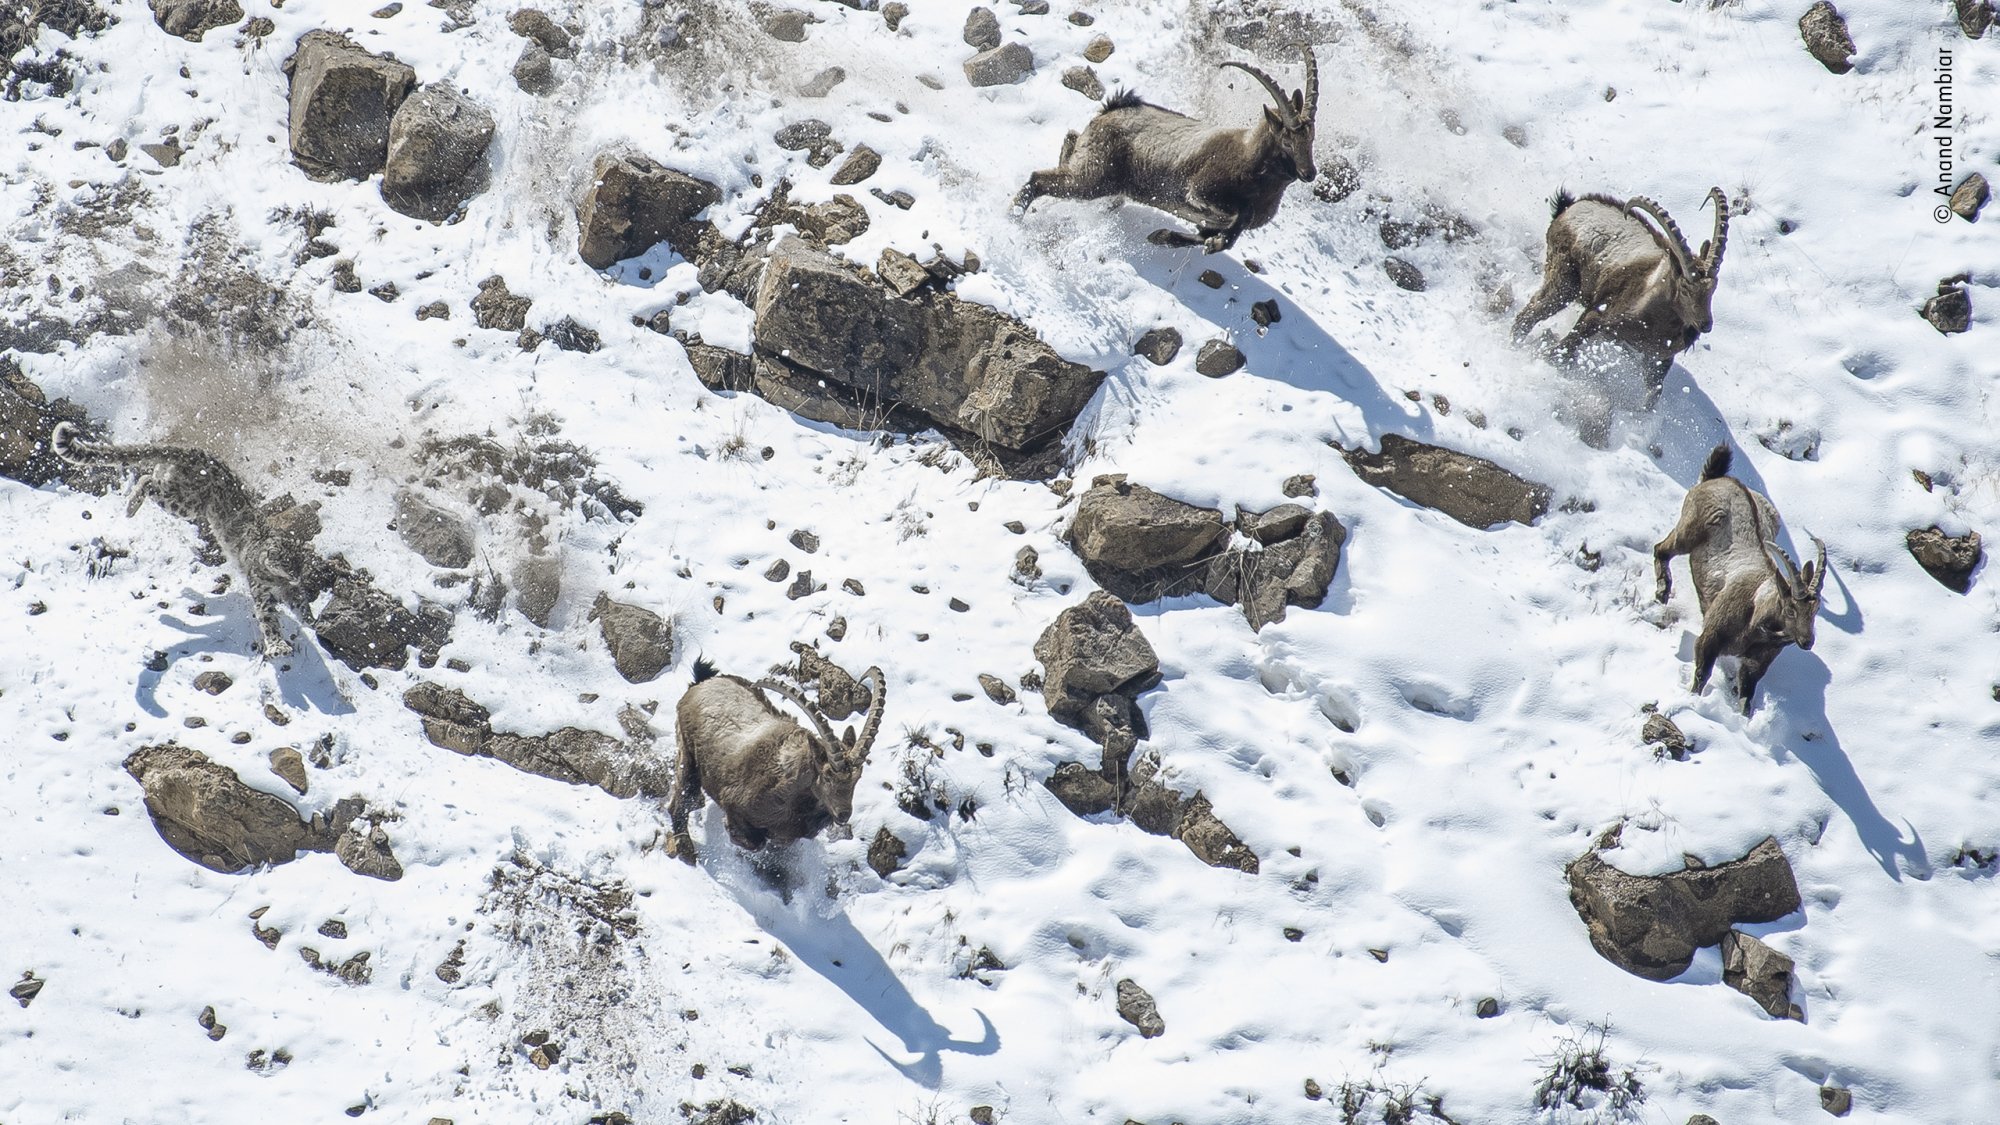 A snow leopard and a herd of Himalayan ibex moving towards a steep edge.